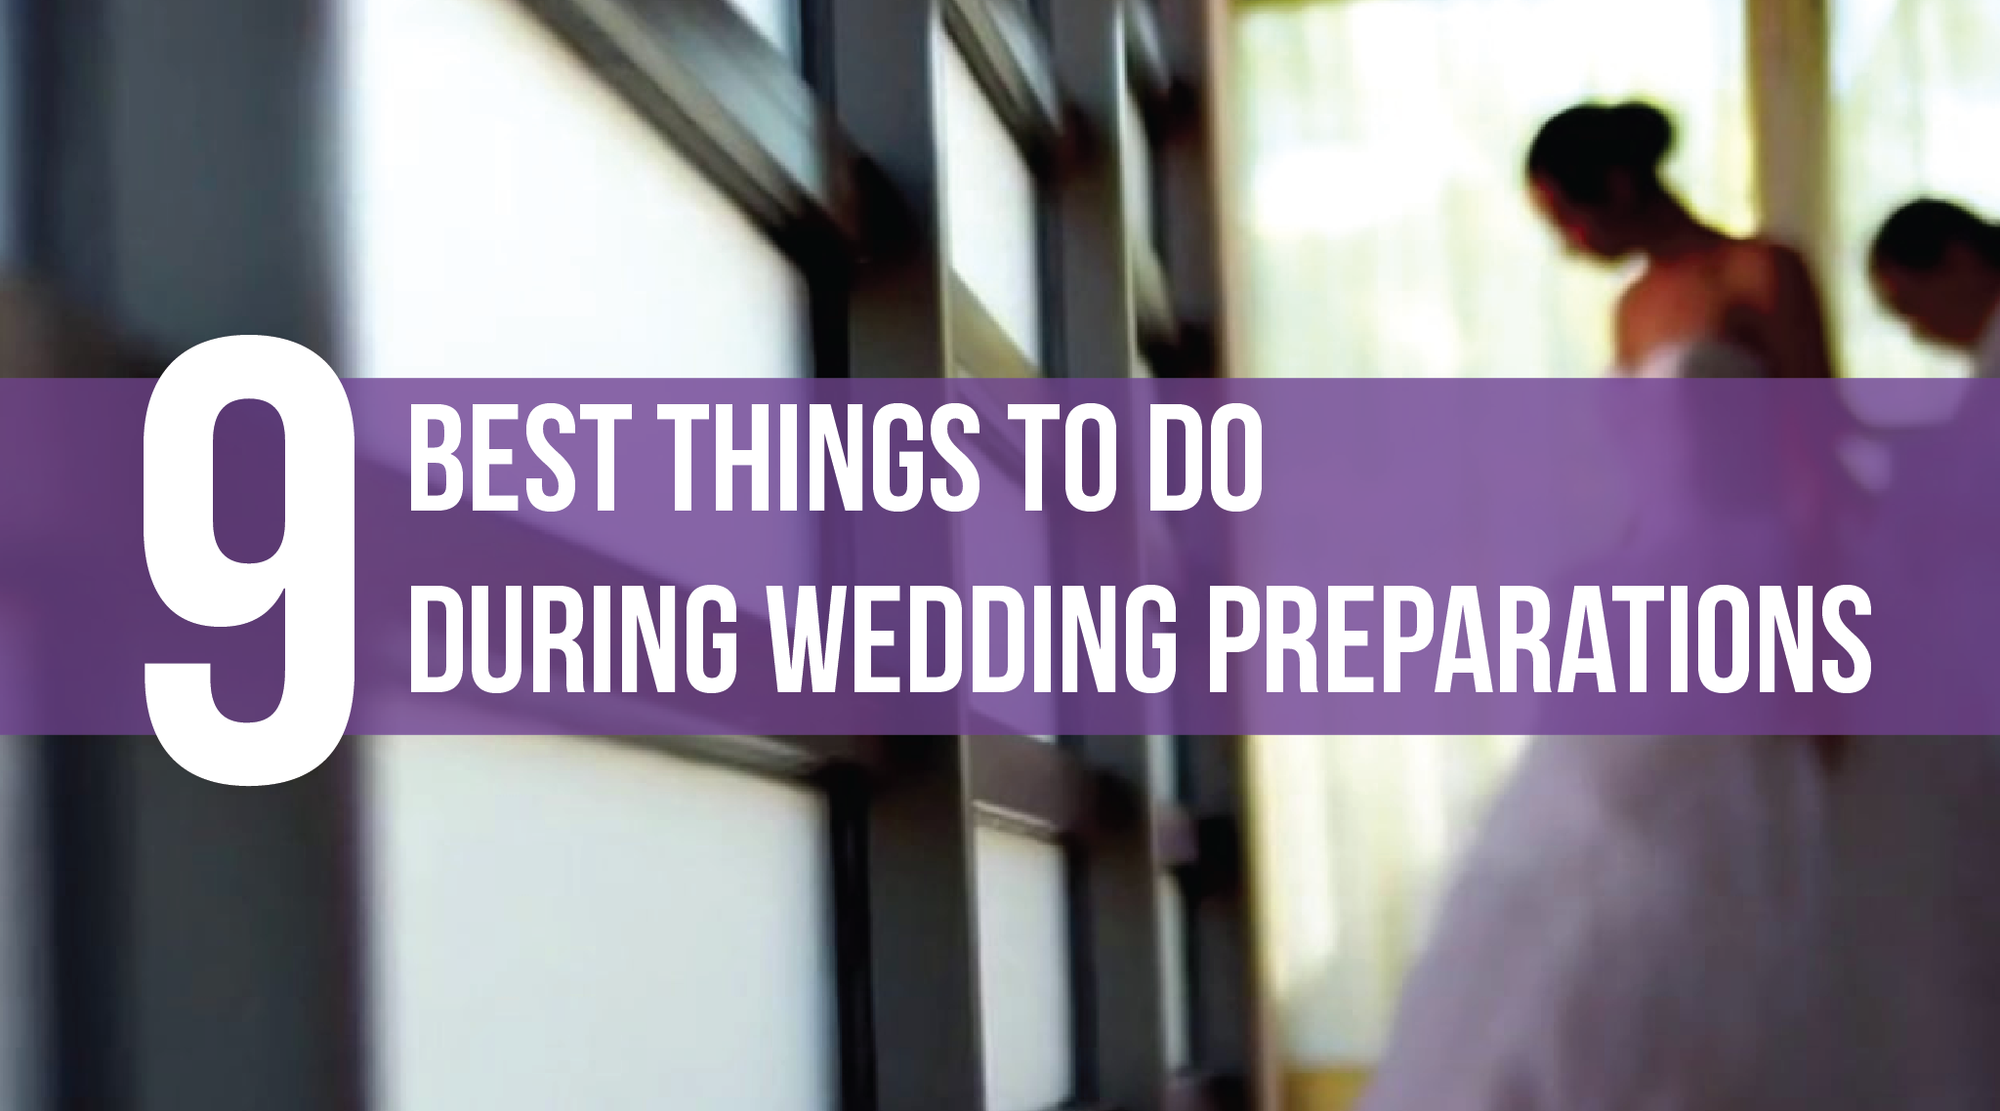 9 Best Things to do During Wedding Preparations